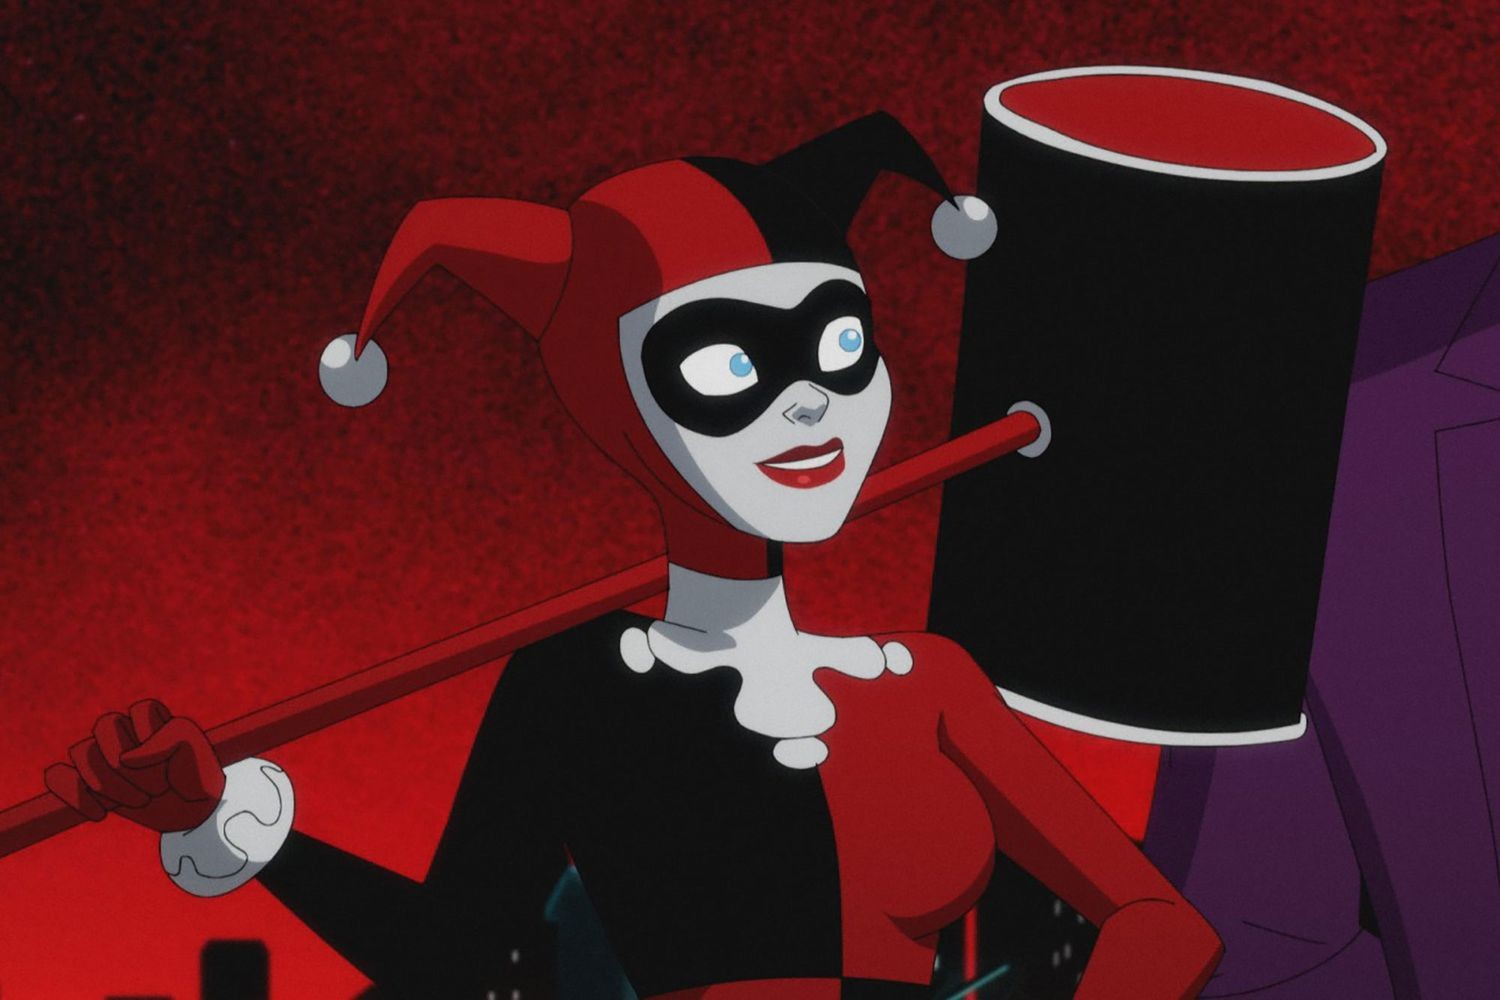 Arleen Sorkin voiced Harley Quinn in various DC animated shows